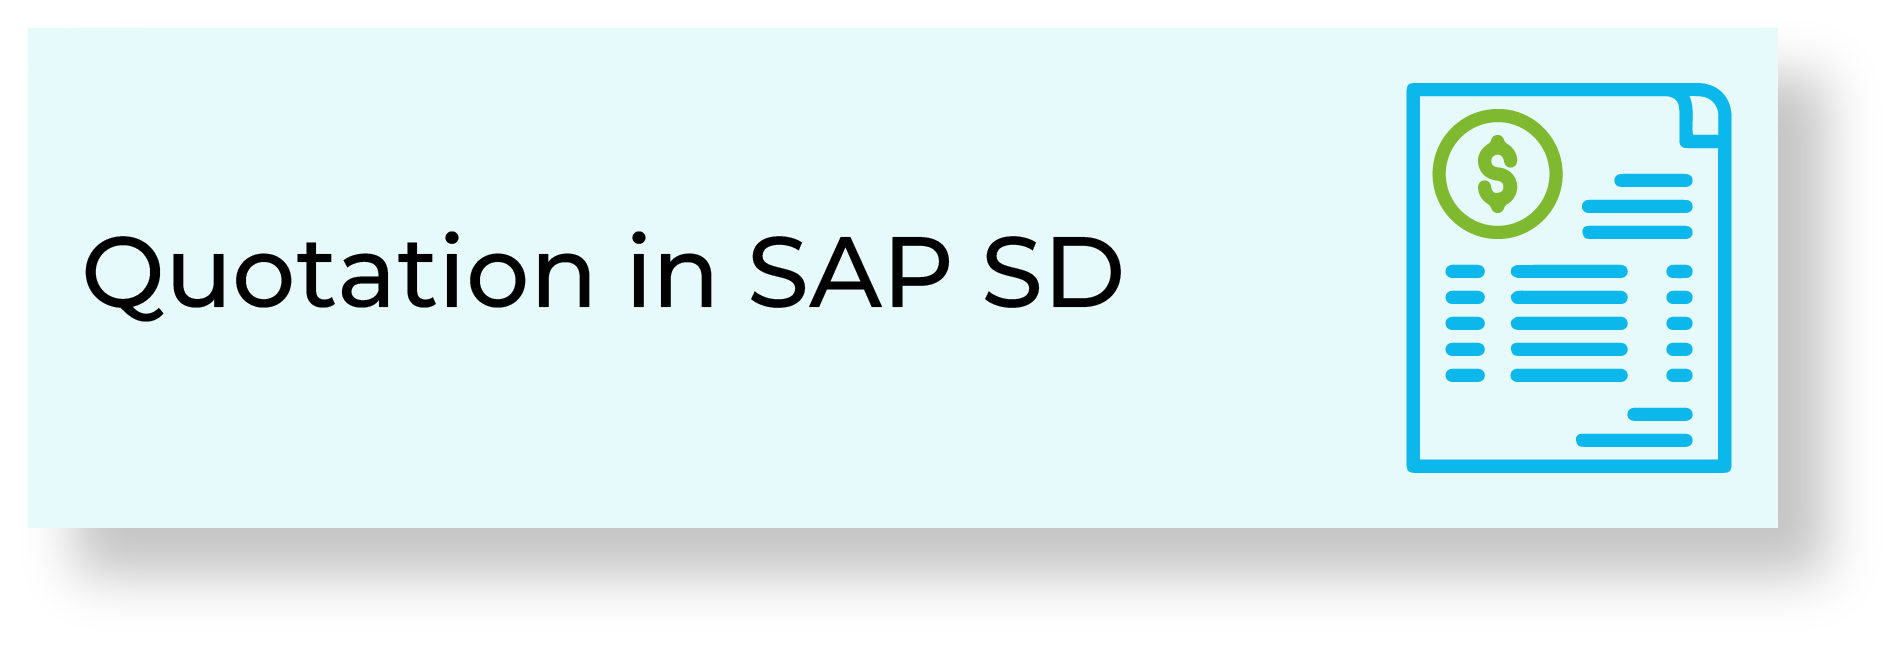 Quotation in SAP SD